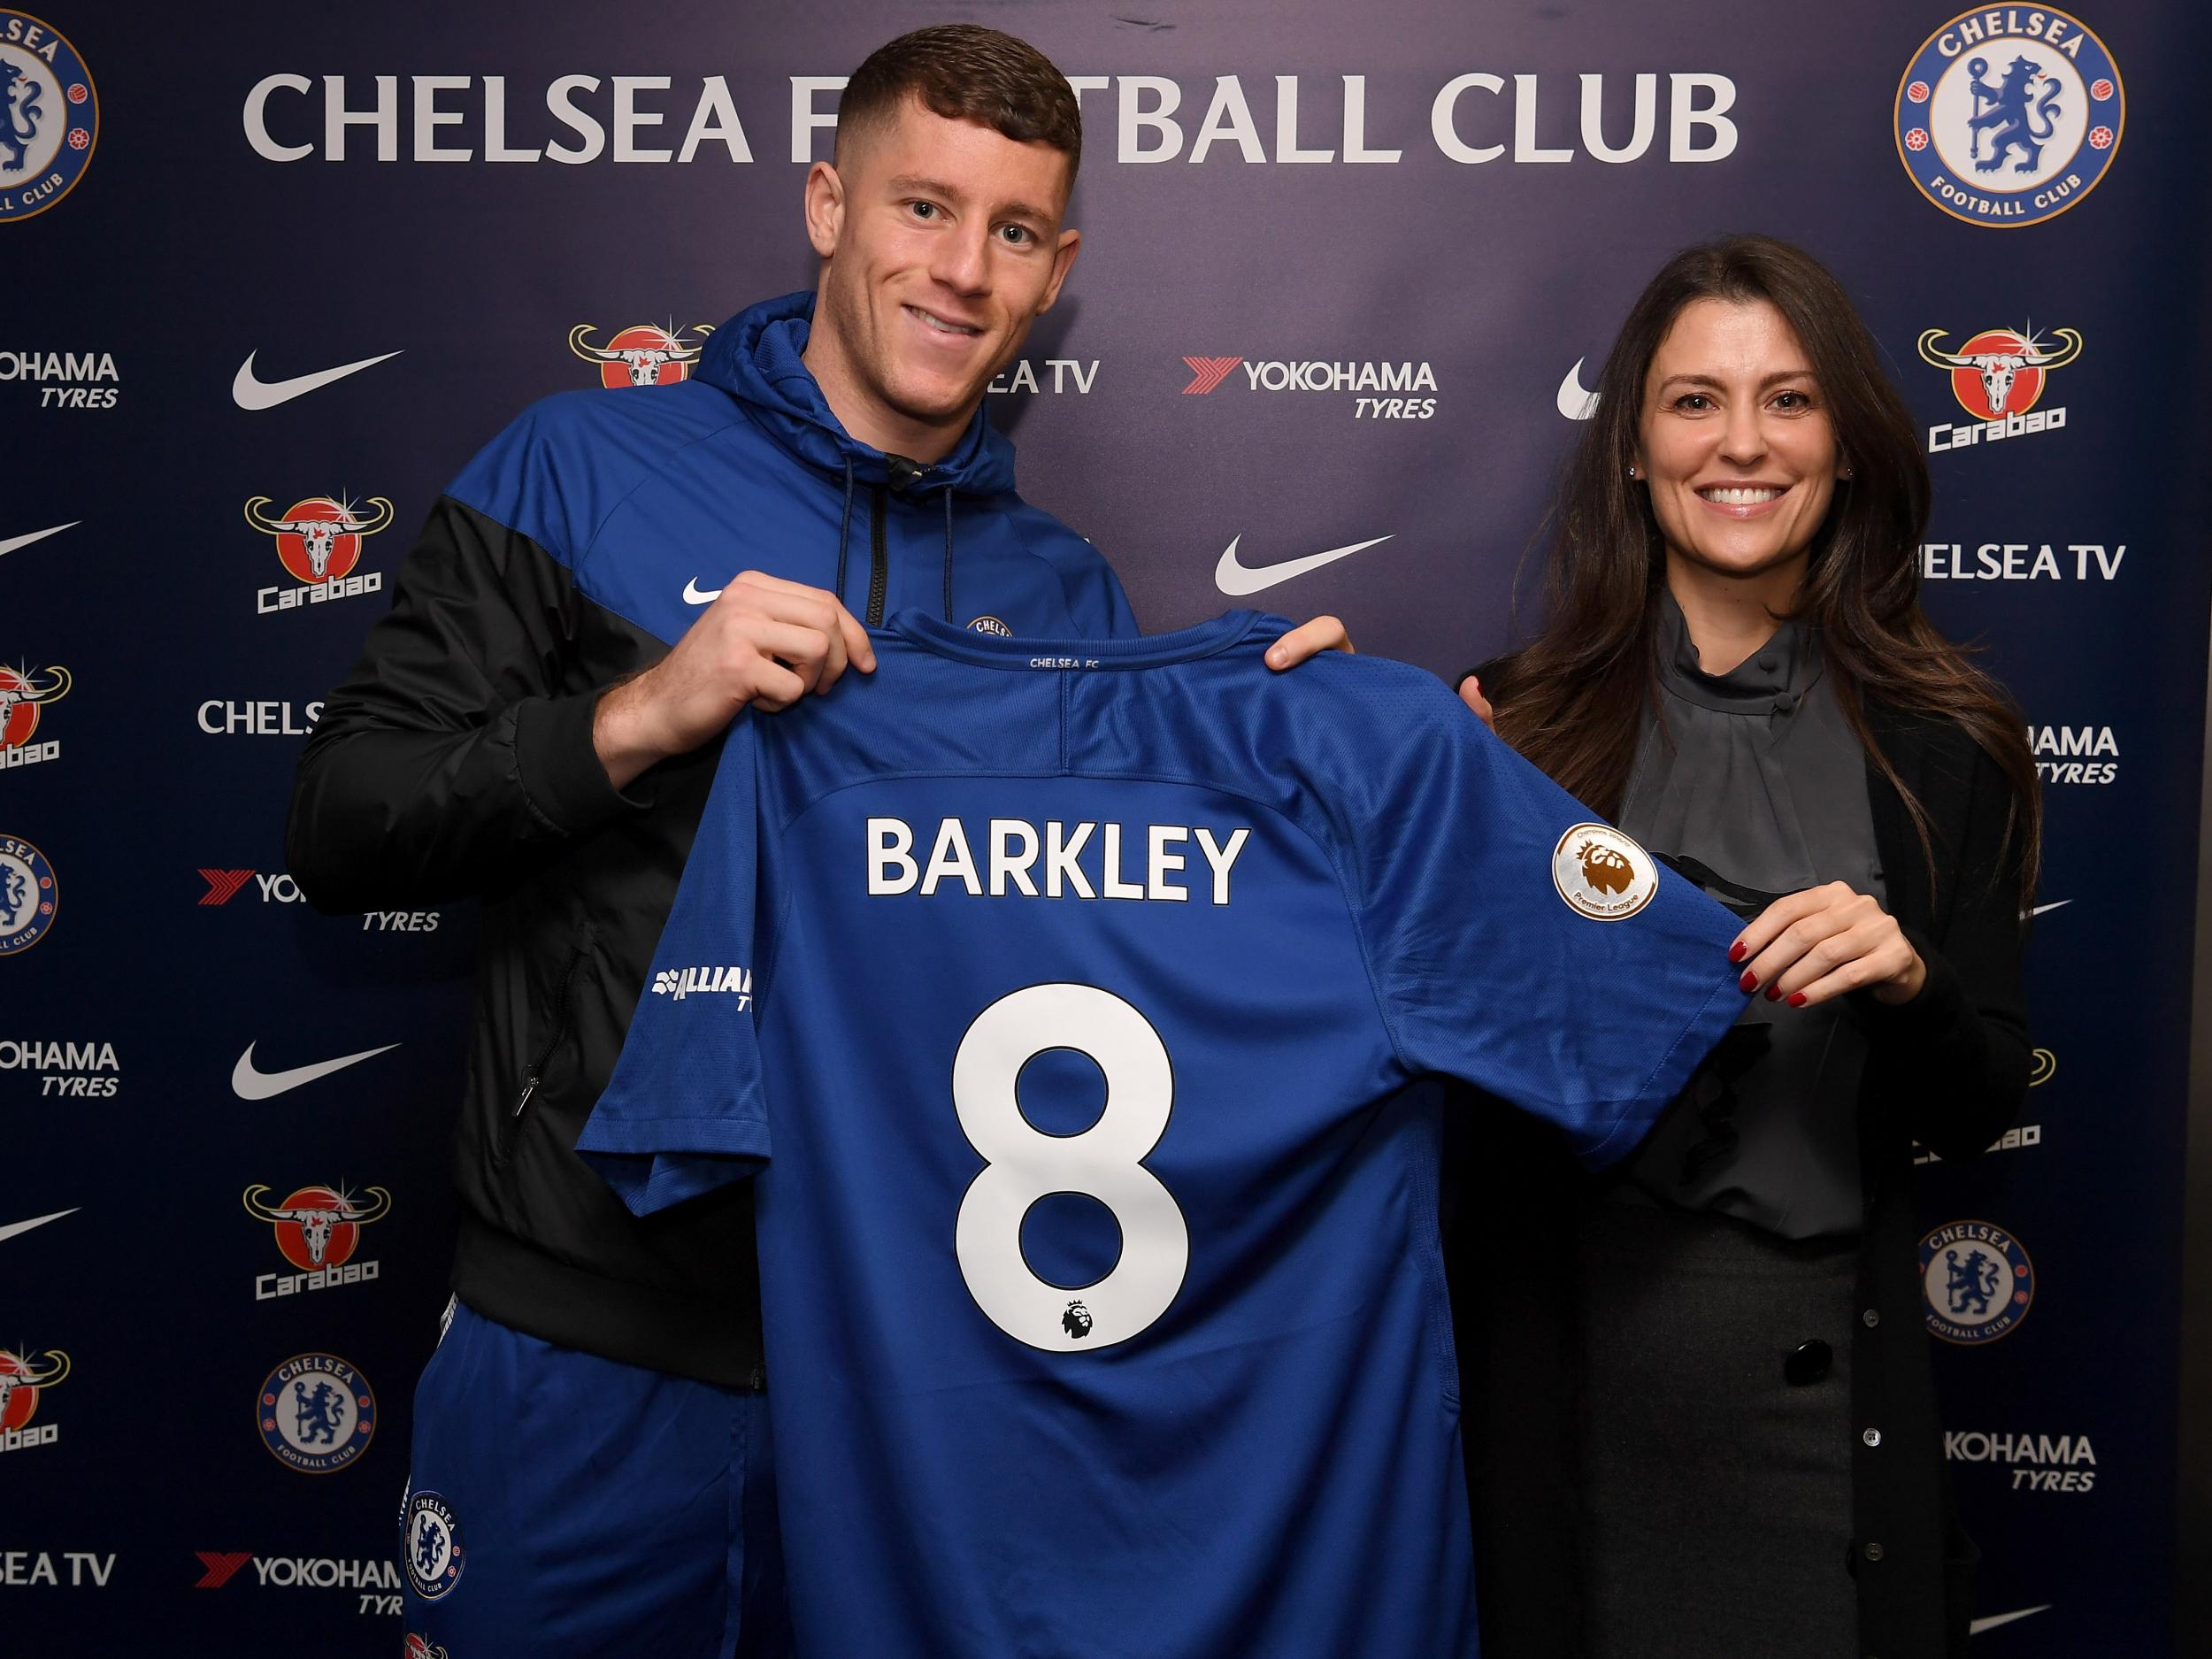 Barkley finally completed a £15m move to Chelsea on Friday